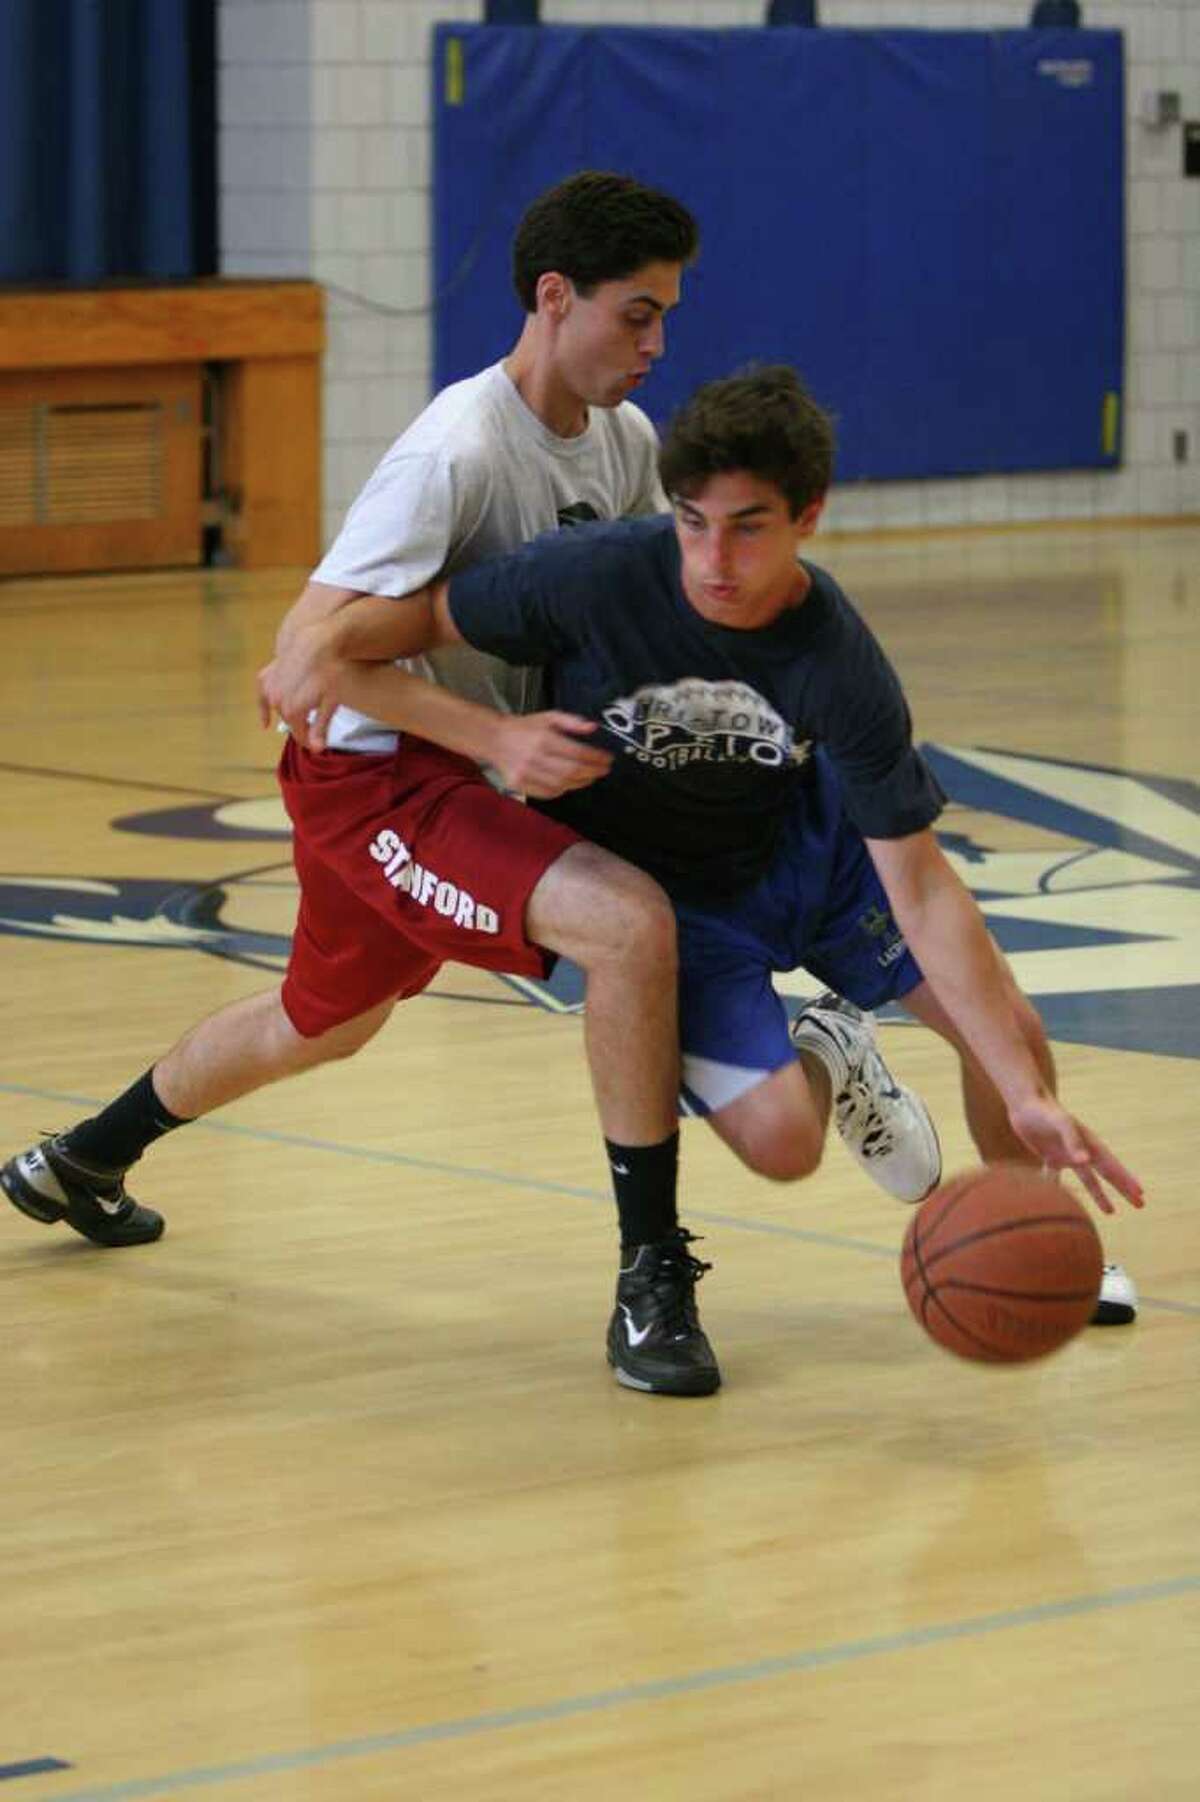 Incoming Staples junior James Frusciante, right, tries to drive past a Hopkins player Sunday in a DeSantis Basketball Academy Summer Basketball League game at Christian Heritage School. Frusciante is developing his game and chemistry with his teammates this summer.